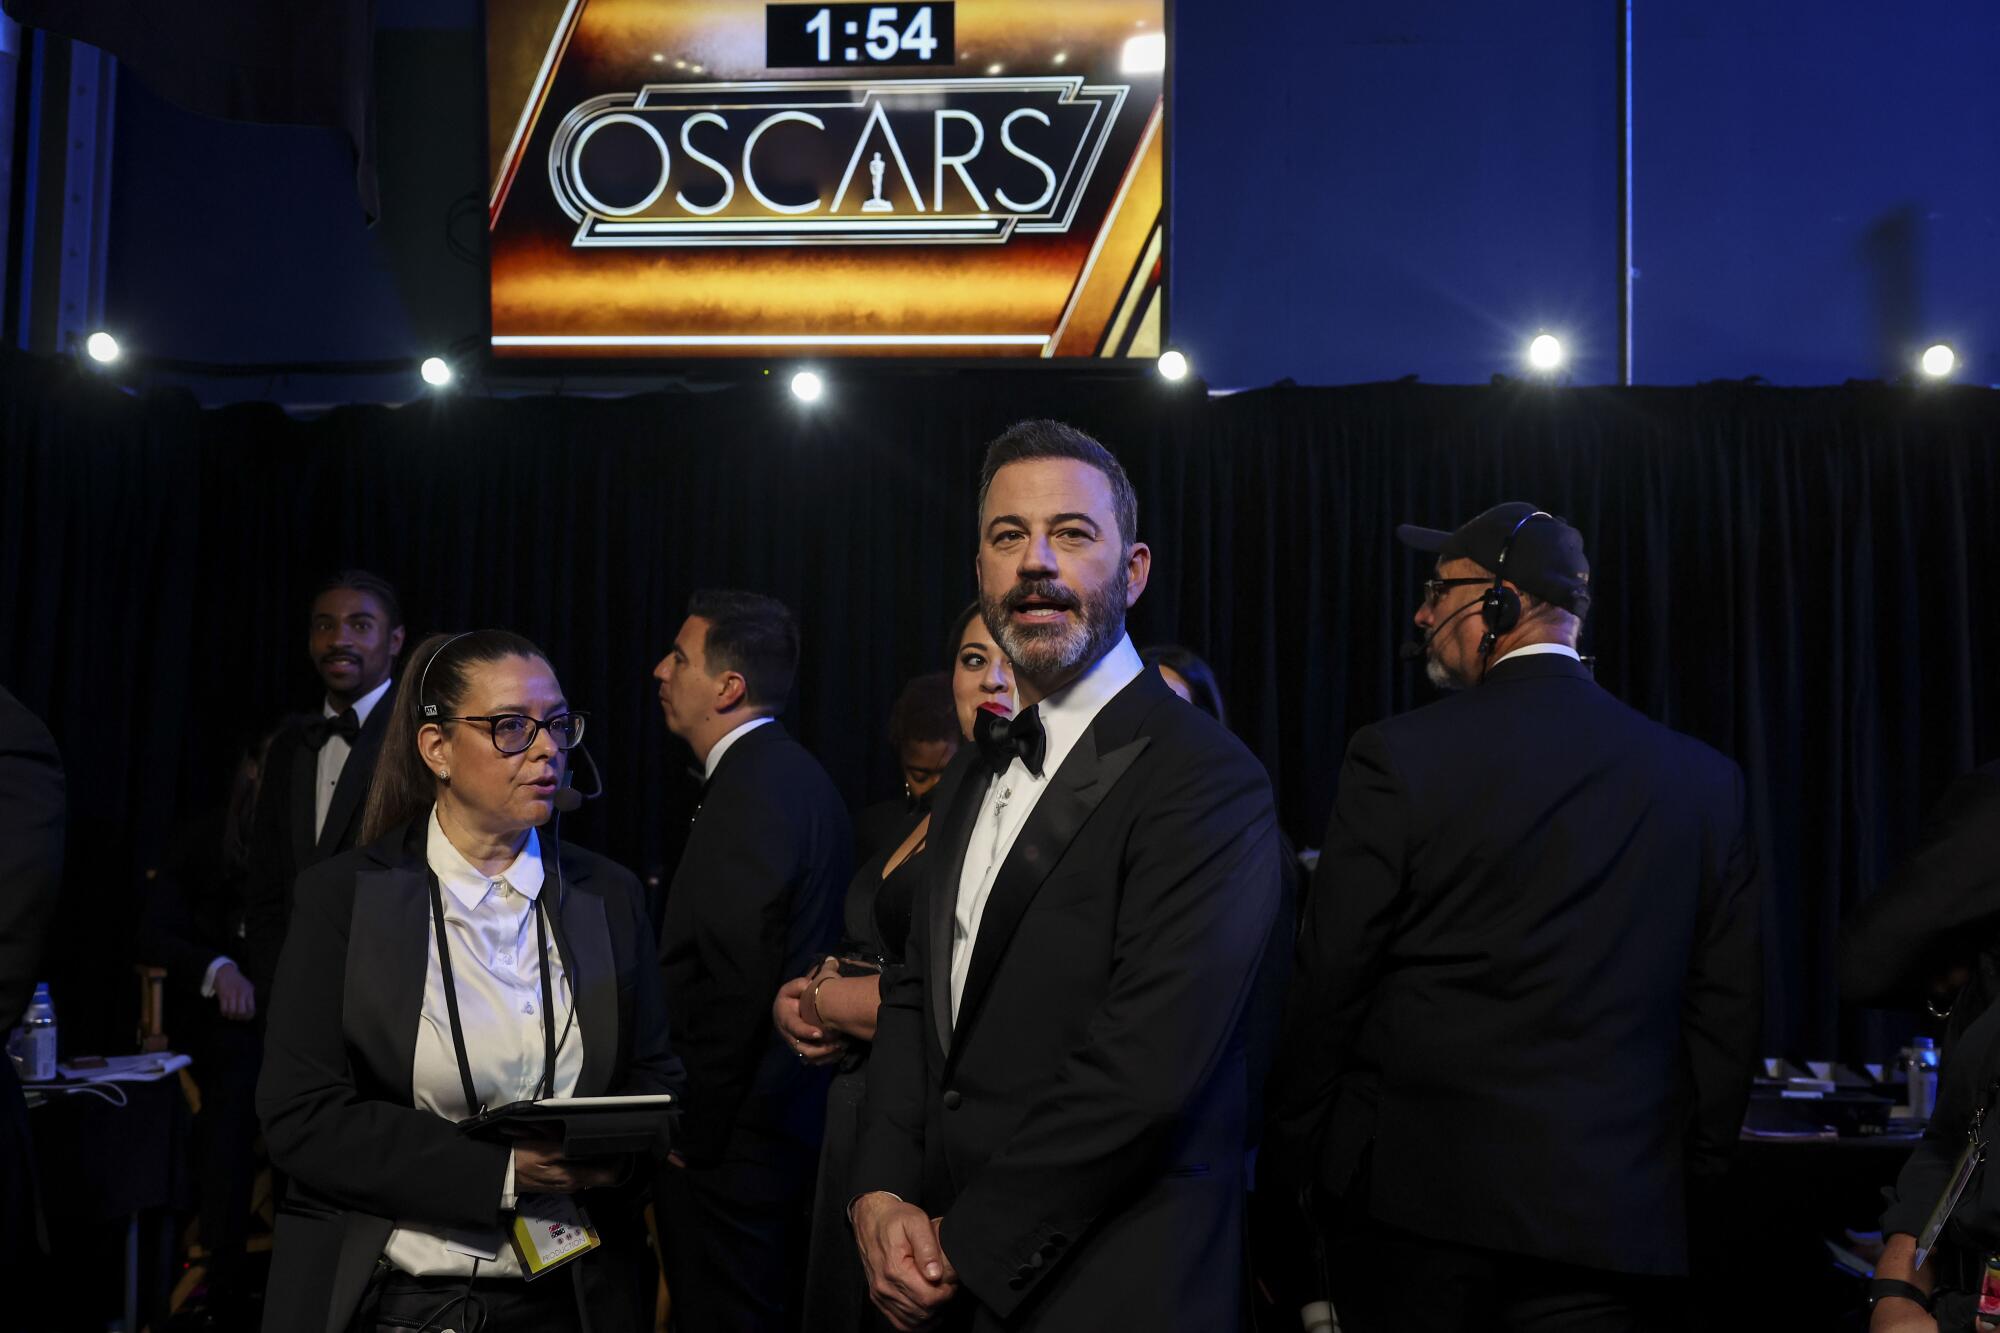 A man in a tux stands under an Oscars sign backstage.